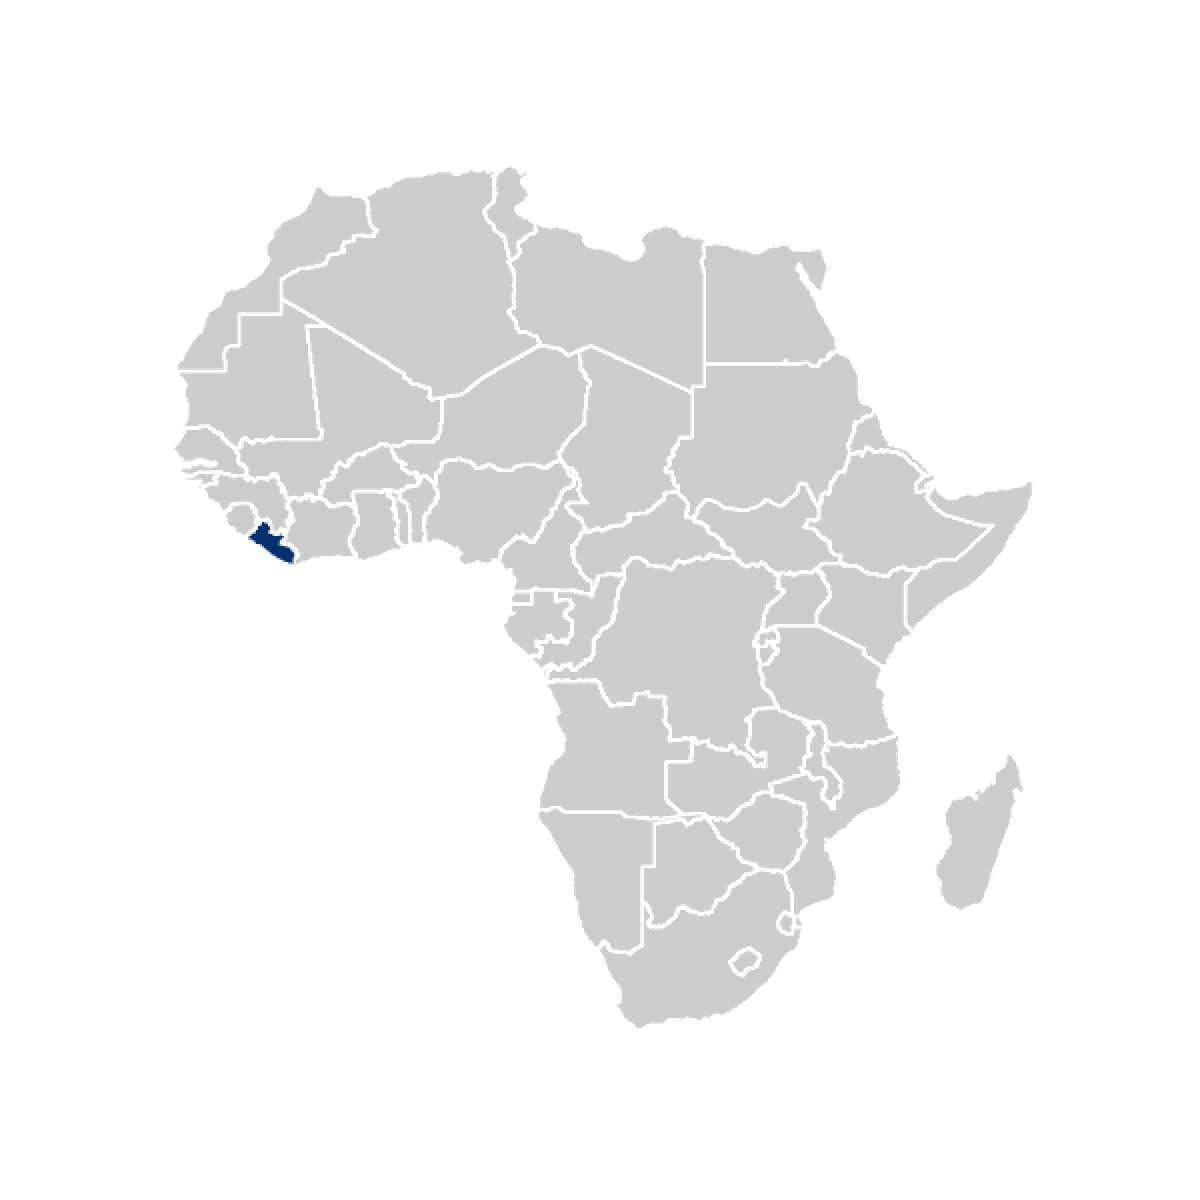 Liberia highlighted on Africa map